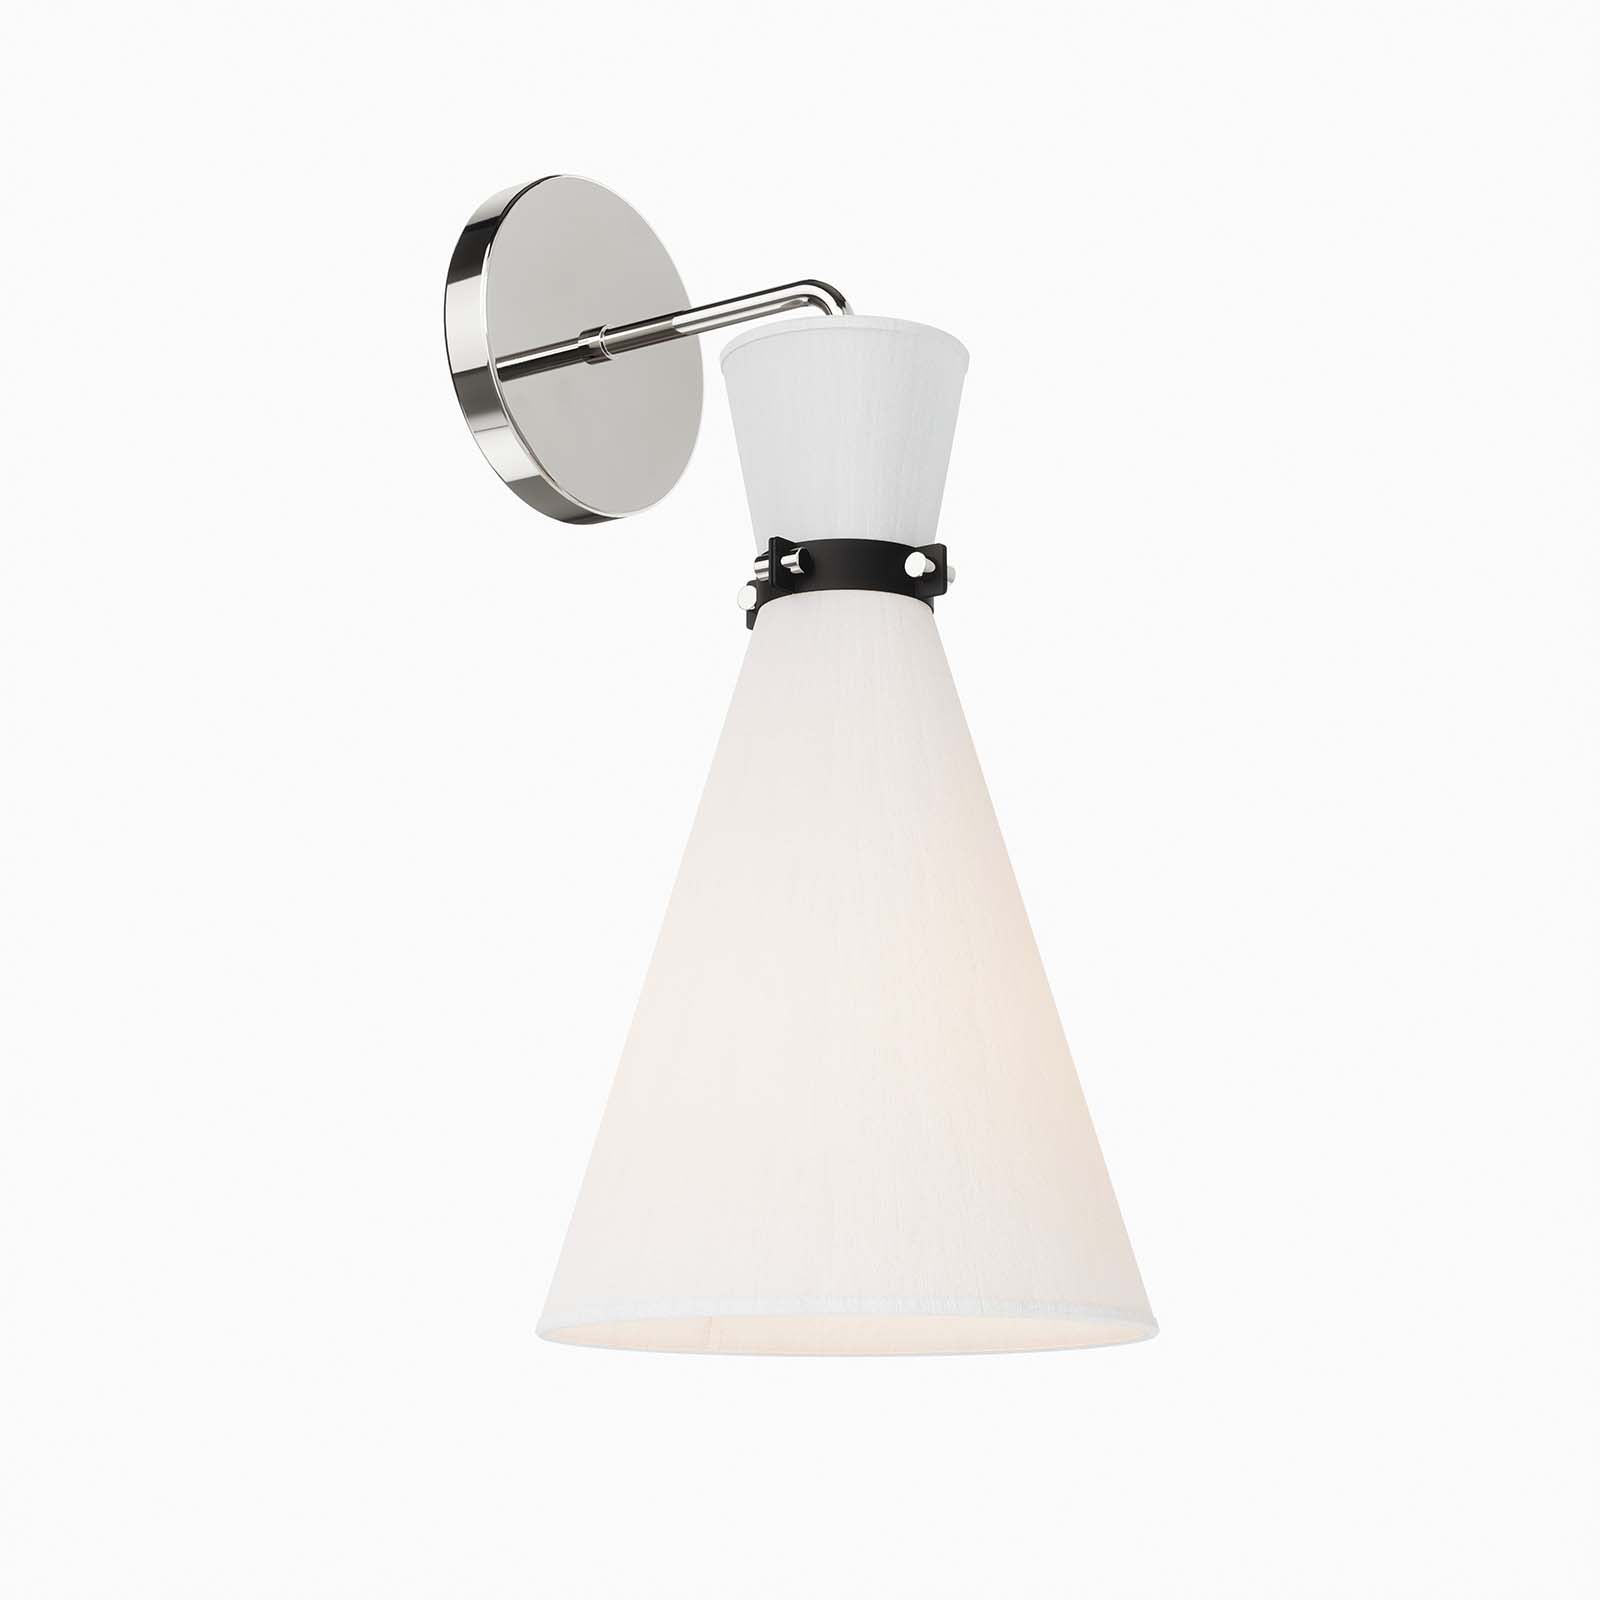 Modway Wall Sconces - Starlight 1-Light Wall Sconce White Polished Nickel